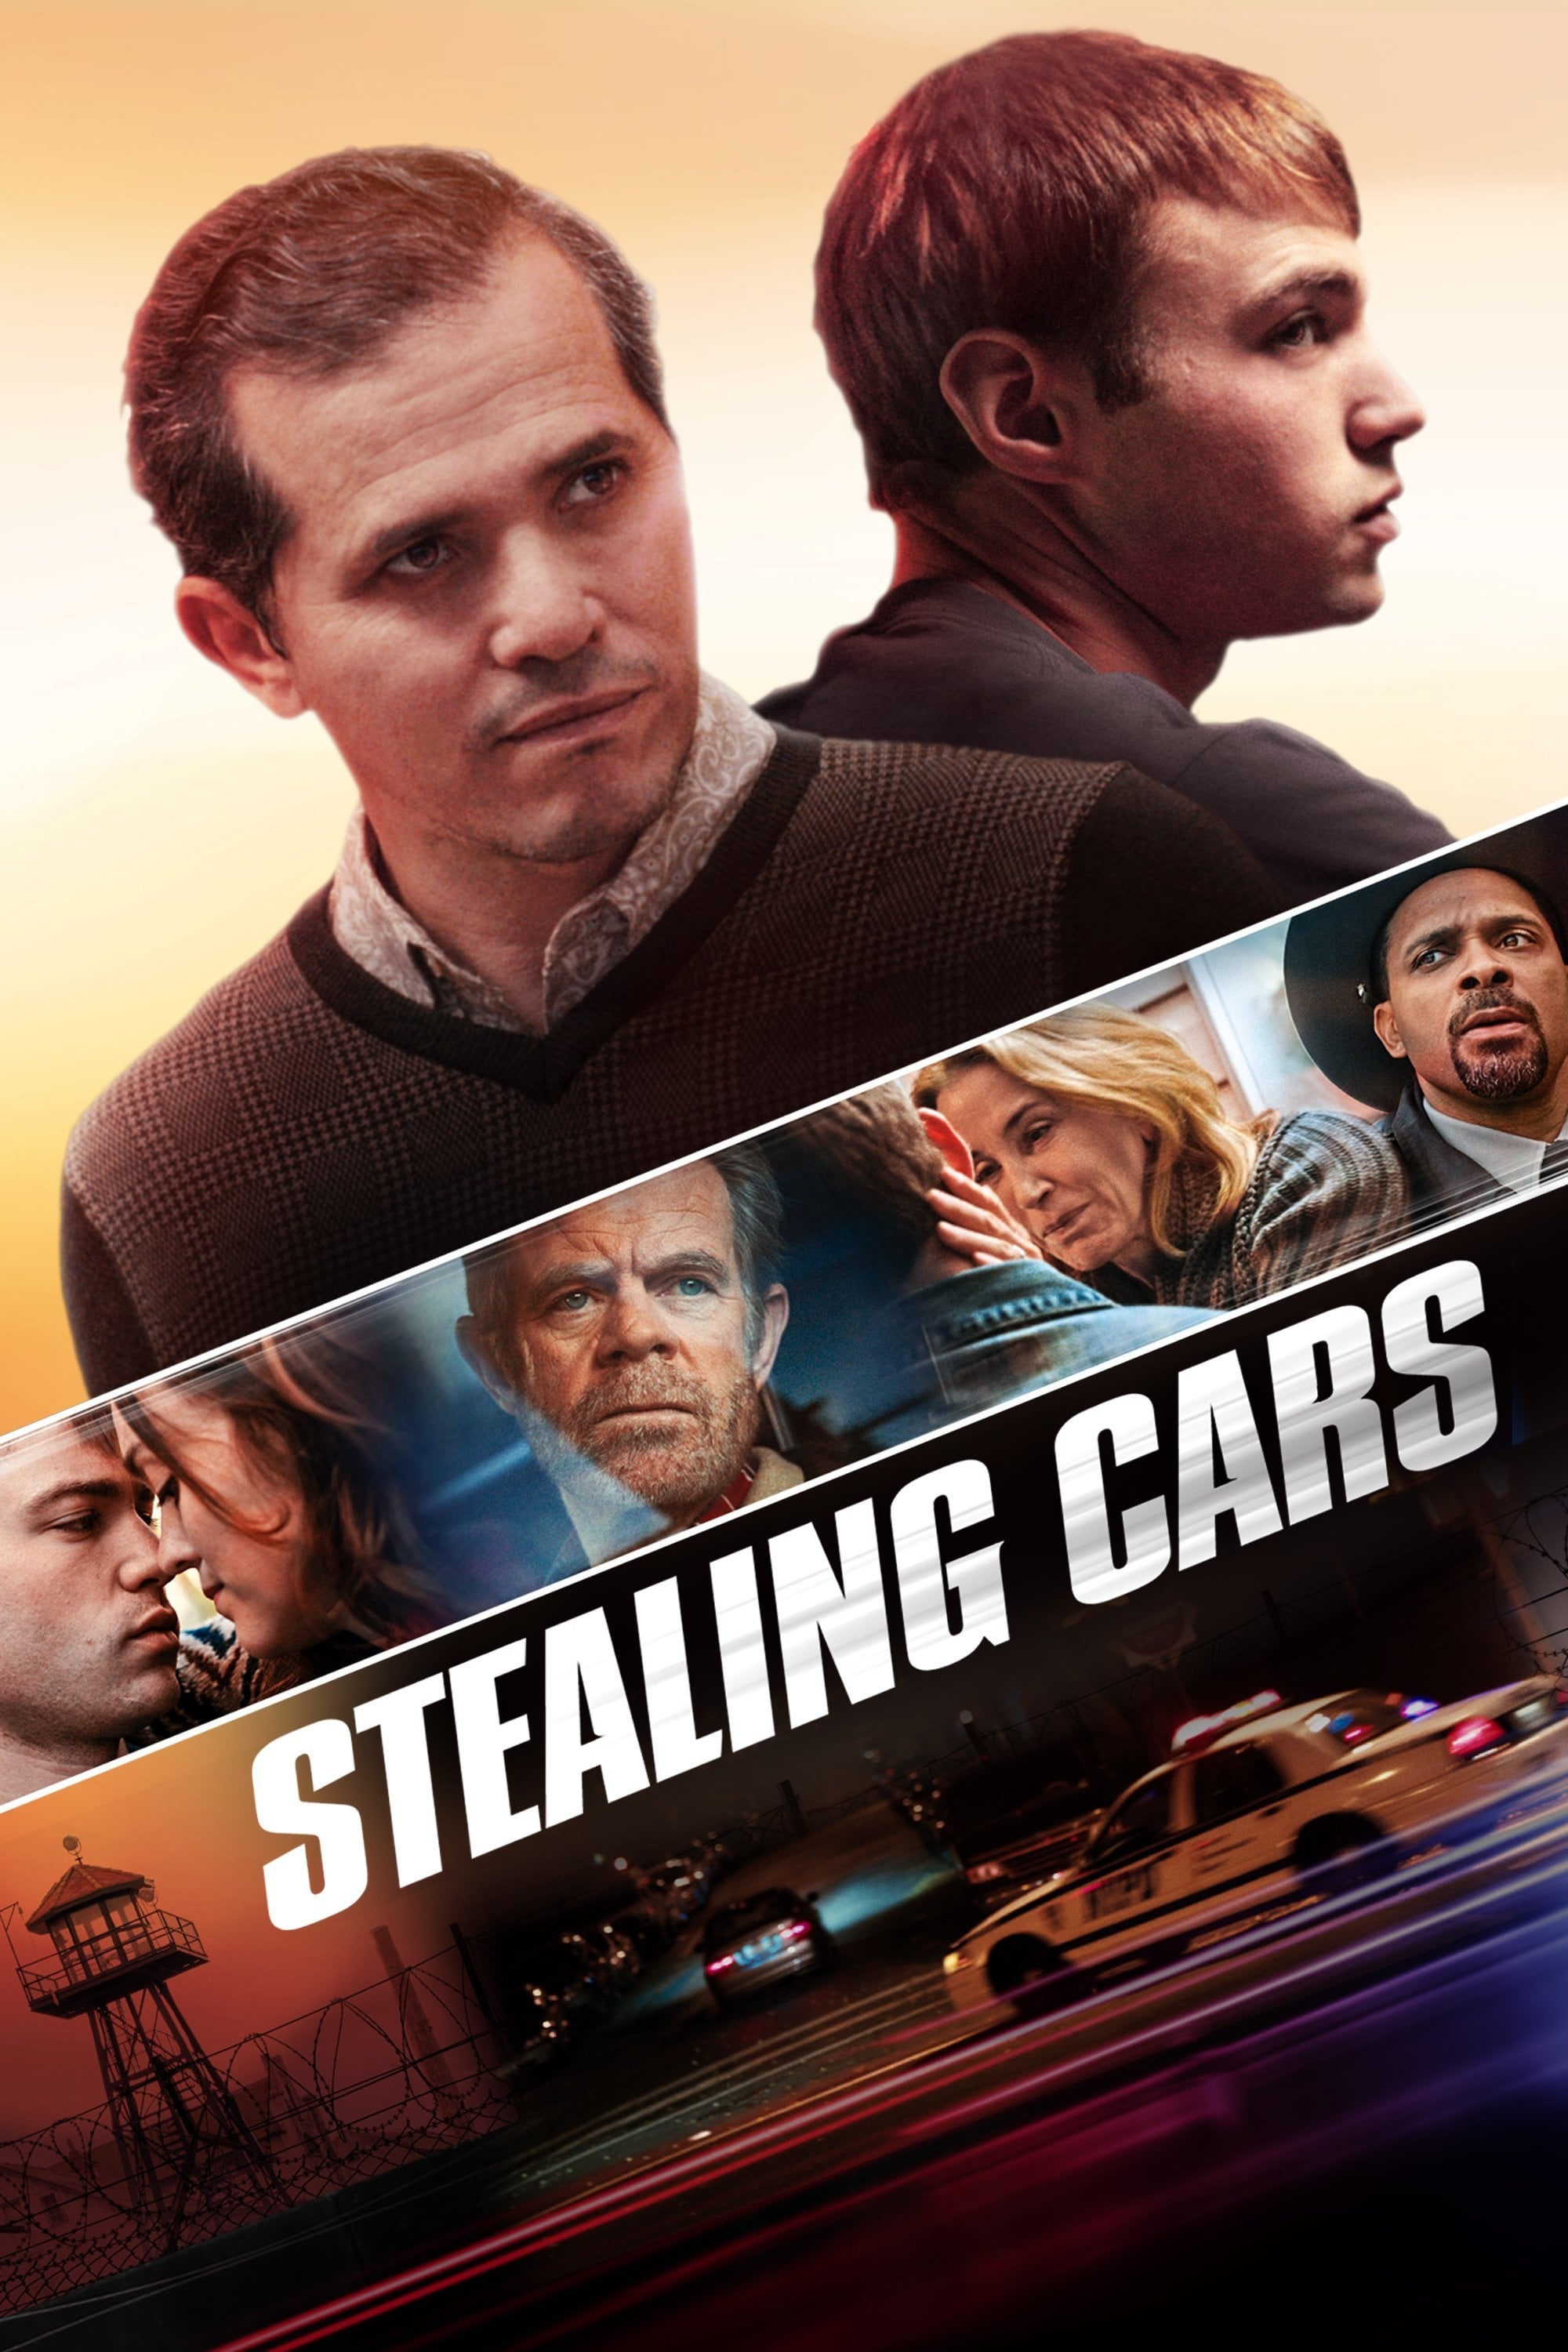 Stealing Cars film